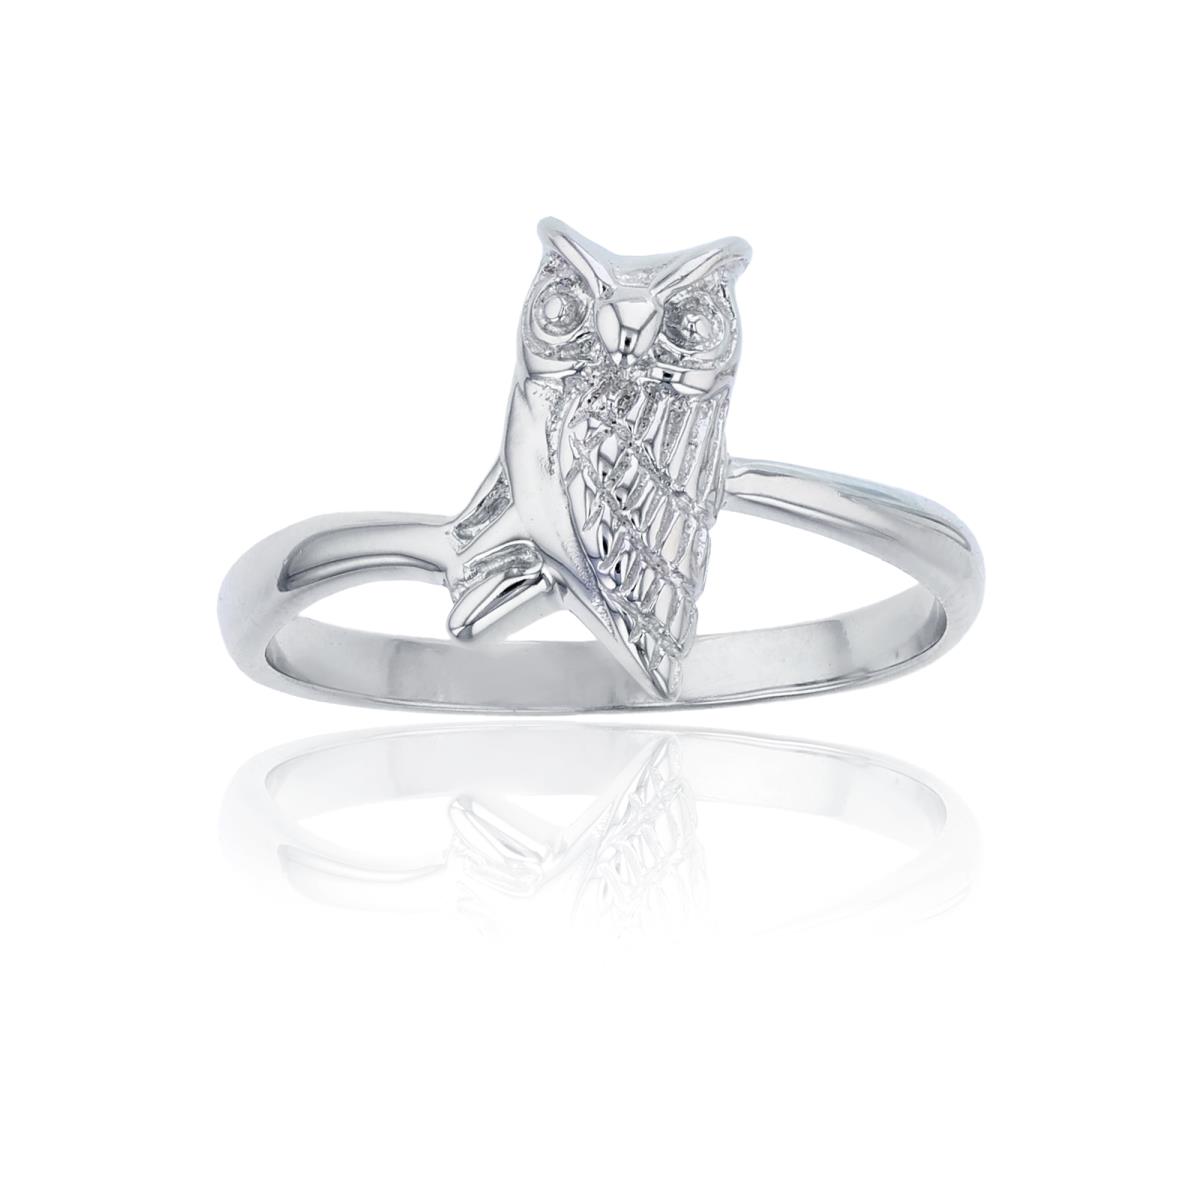 Sterling Silver Owl Ring